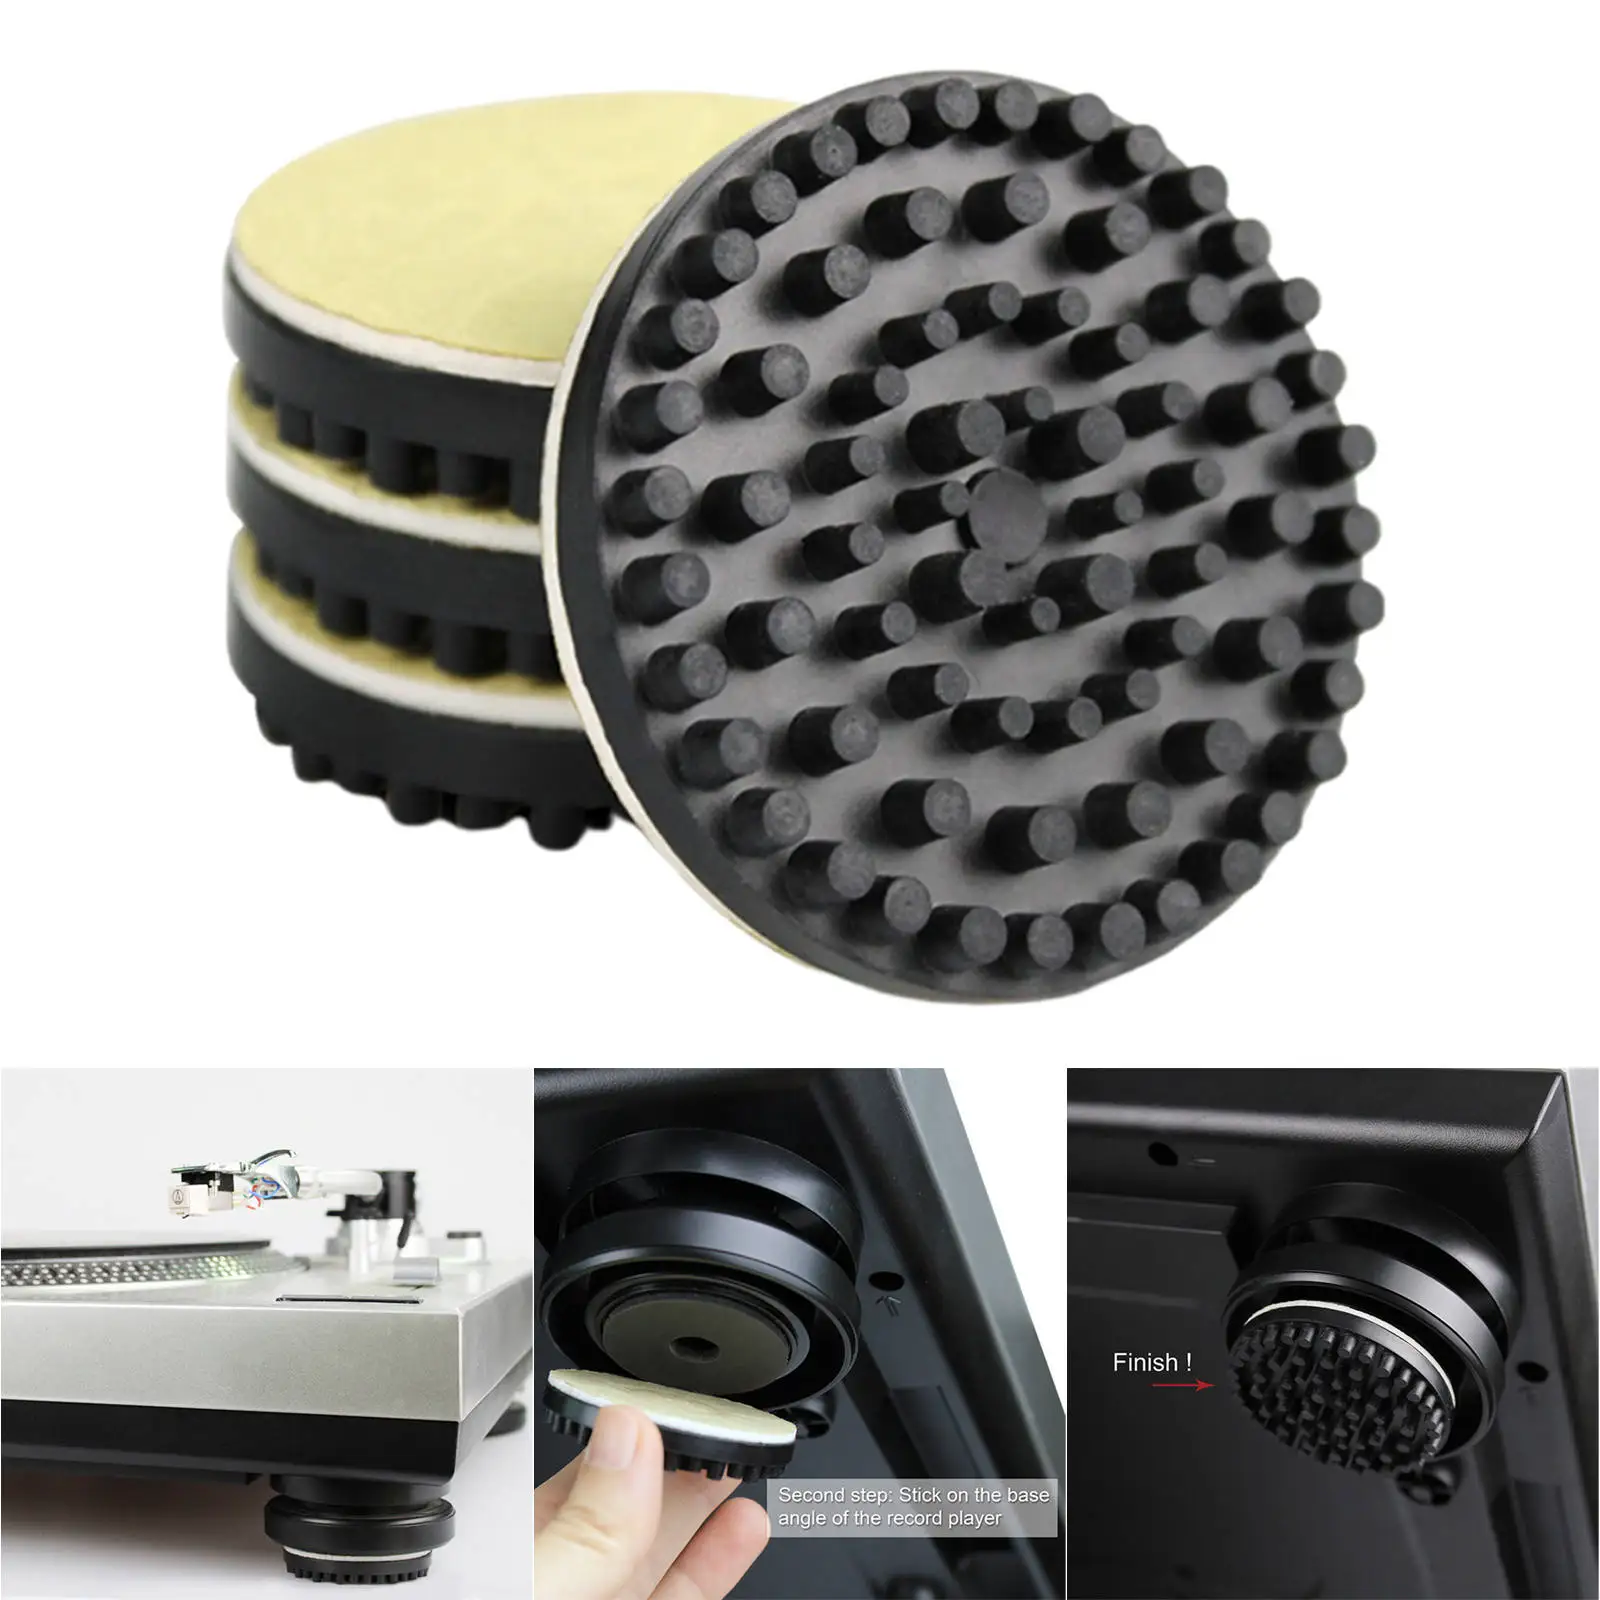 Rubber Turntable Isolation Feet Vibration-Absorption 2 inch Diameter Isolation Stand Feet Pads for Record Player Speakers Parts